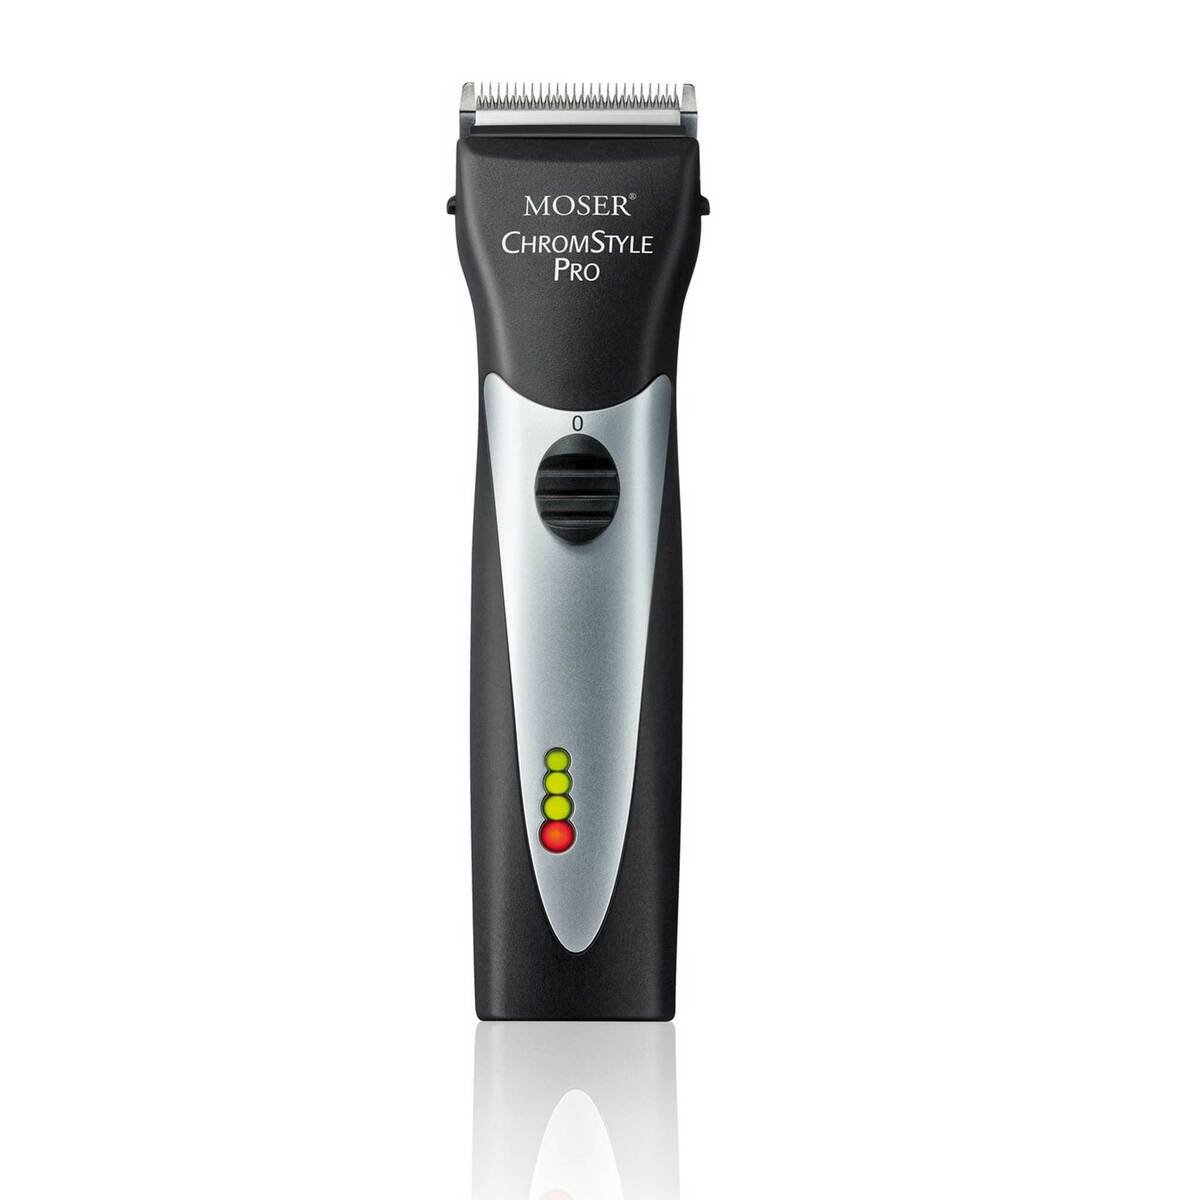 Moser ChromStyle Professional Cord/Cordless Hair Clipper 1871-0081 Black